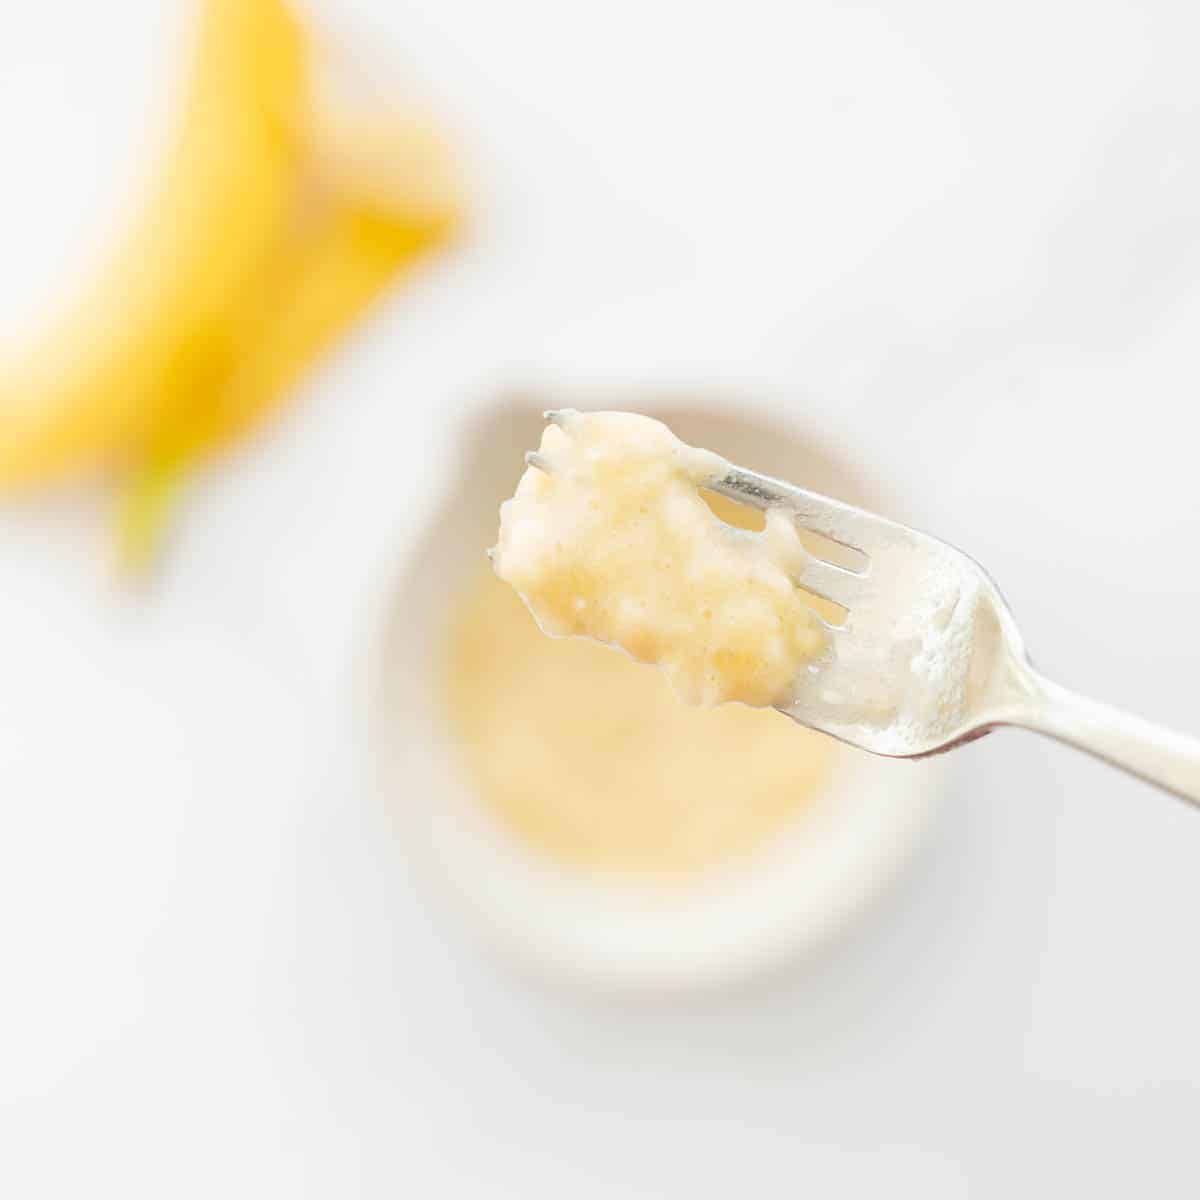 In the faded background you can see a banana skin and a bowl. Up close is a fork with creamy mashed banana